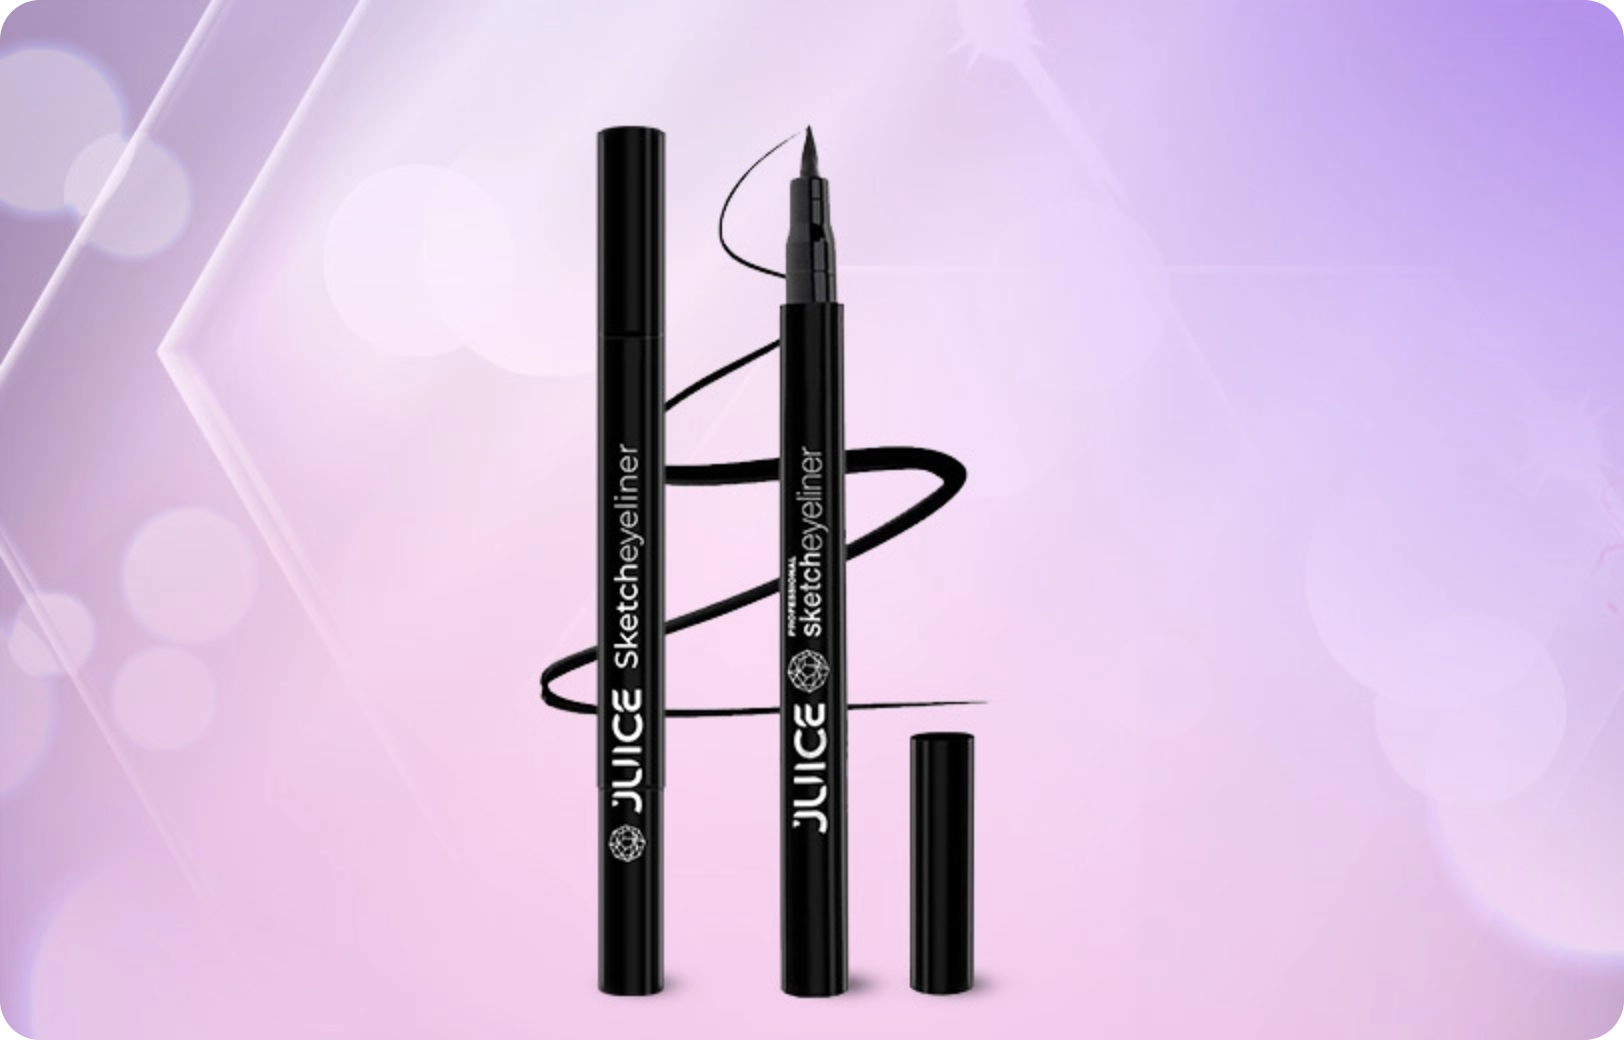 Buy ADS Foundation with Sketch Pen Eyeliner Online at Low Prices in India   Amazonin